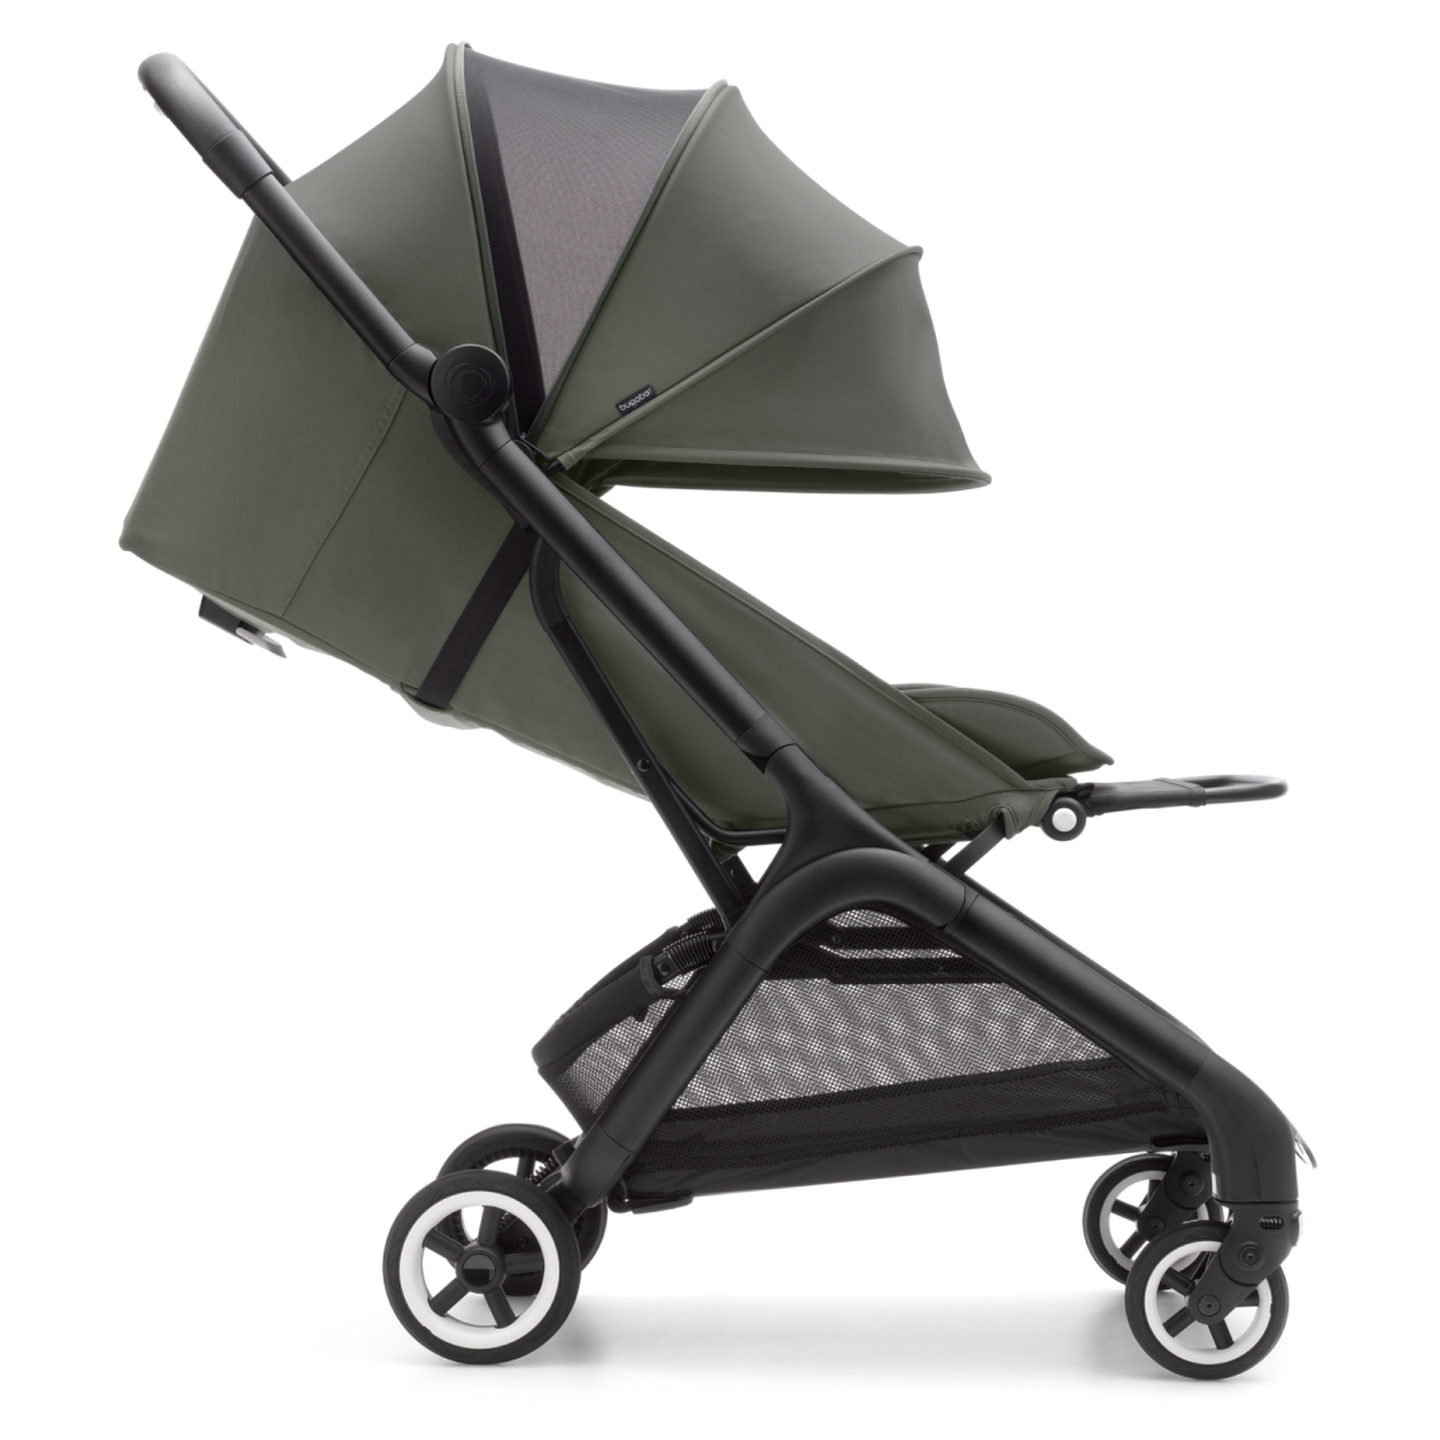 Sideway view of a Bugaboo Butterfly compact travel stroller with a Forest Green canopy fully extended.